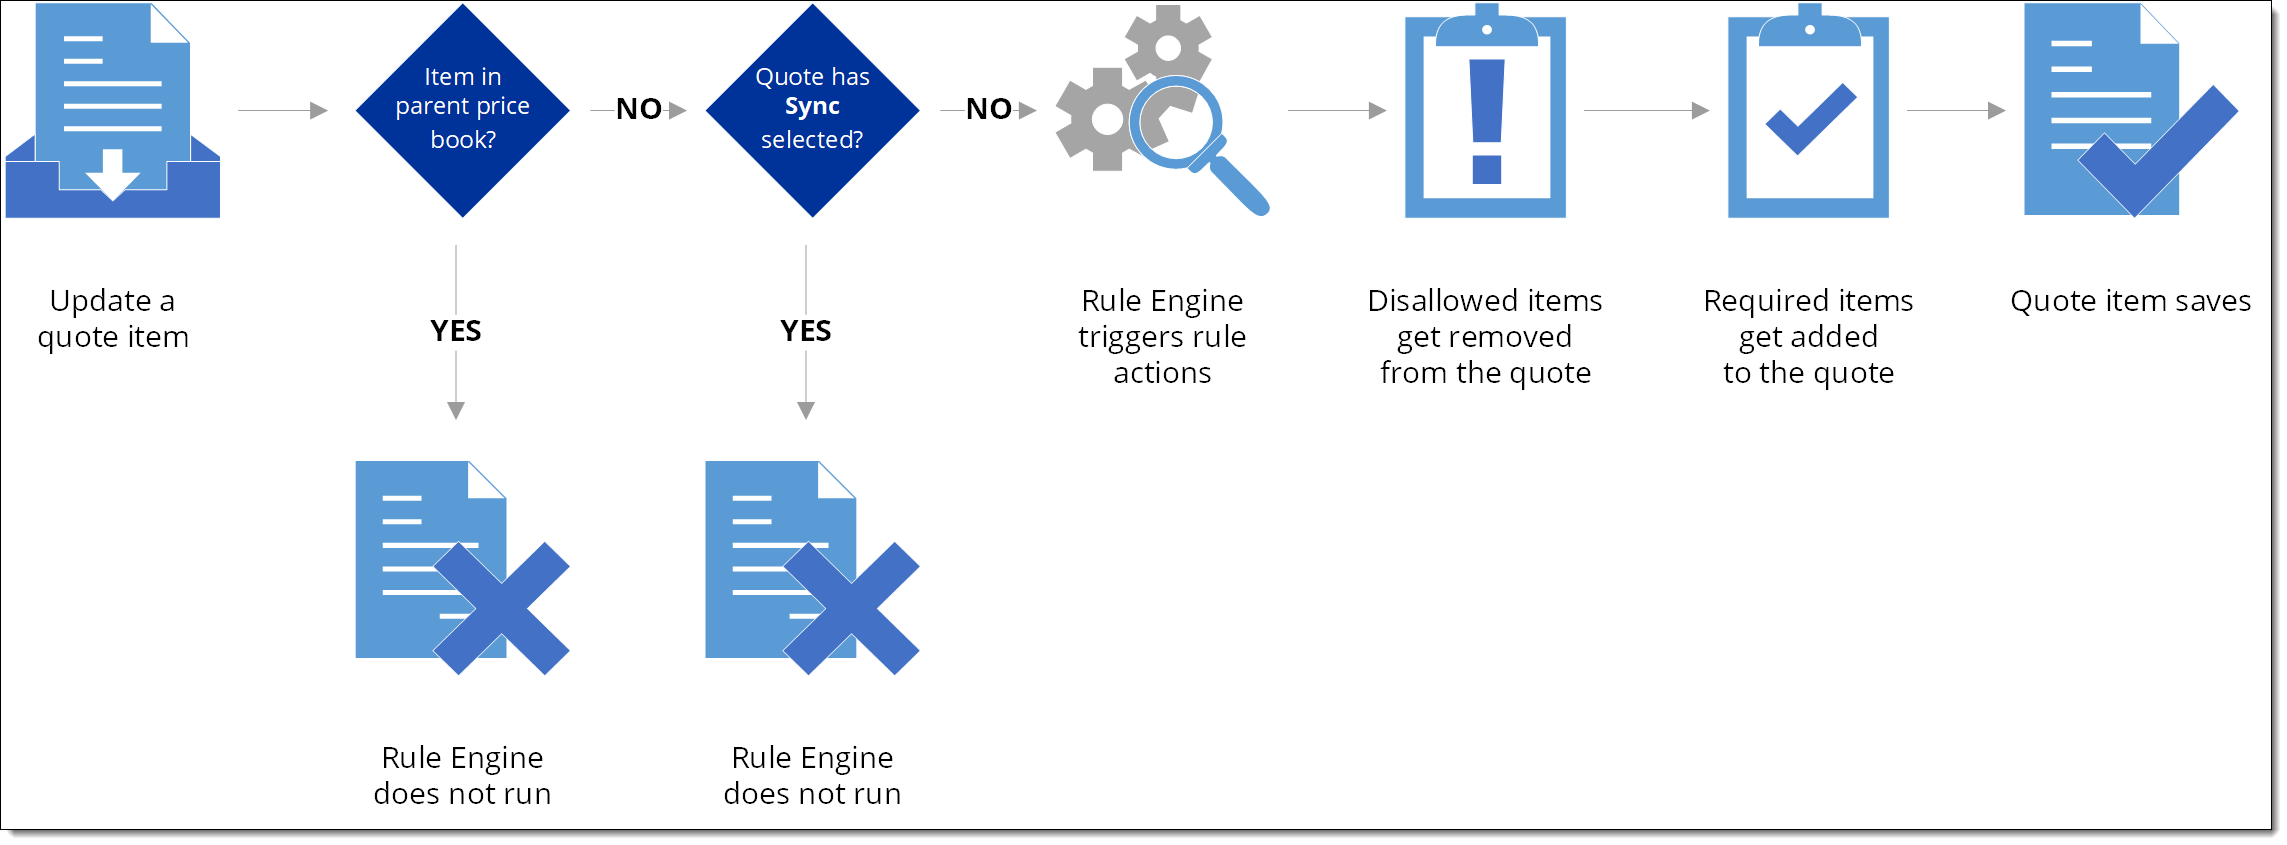 Graphic showing the rule engine process when updating a quote item in FieldFX Back Office